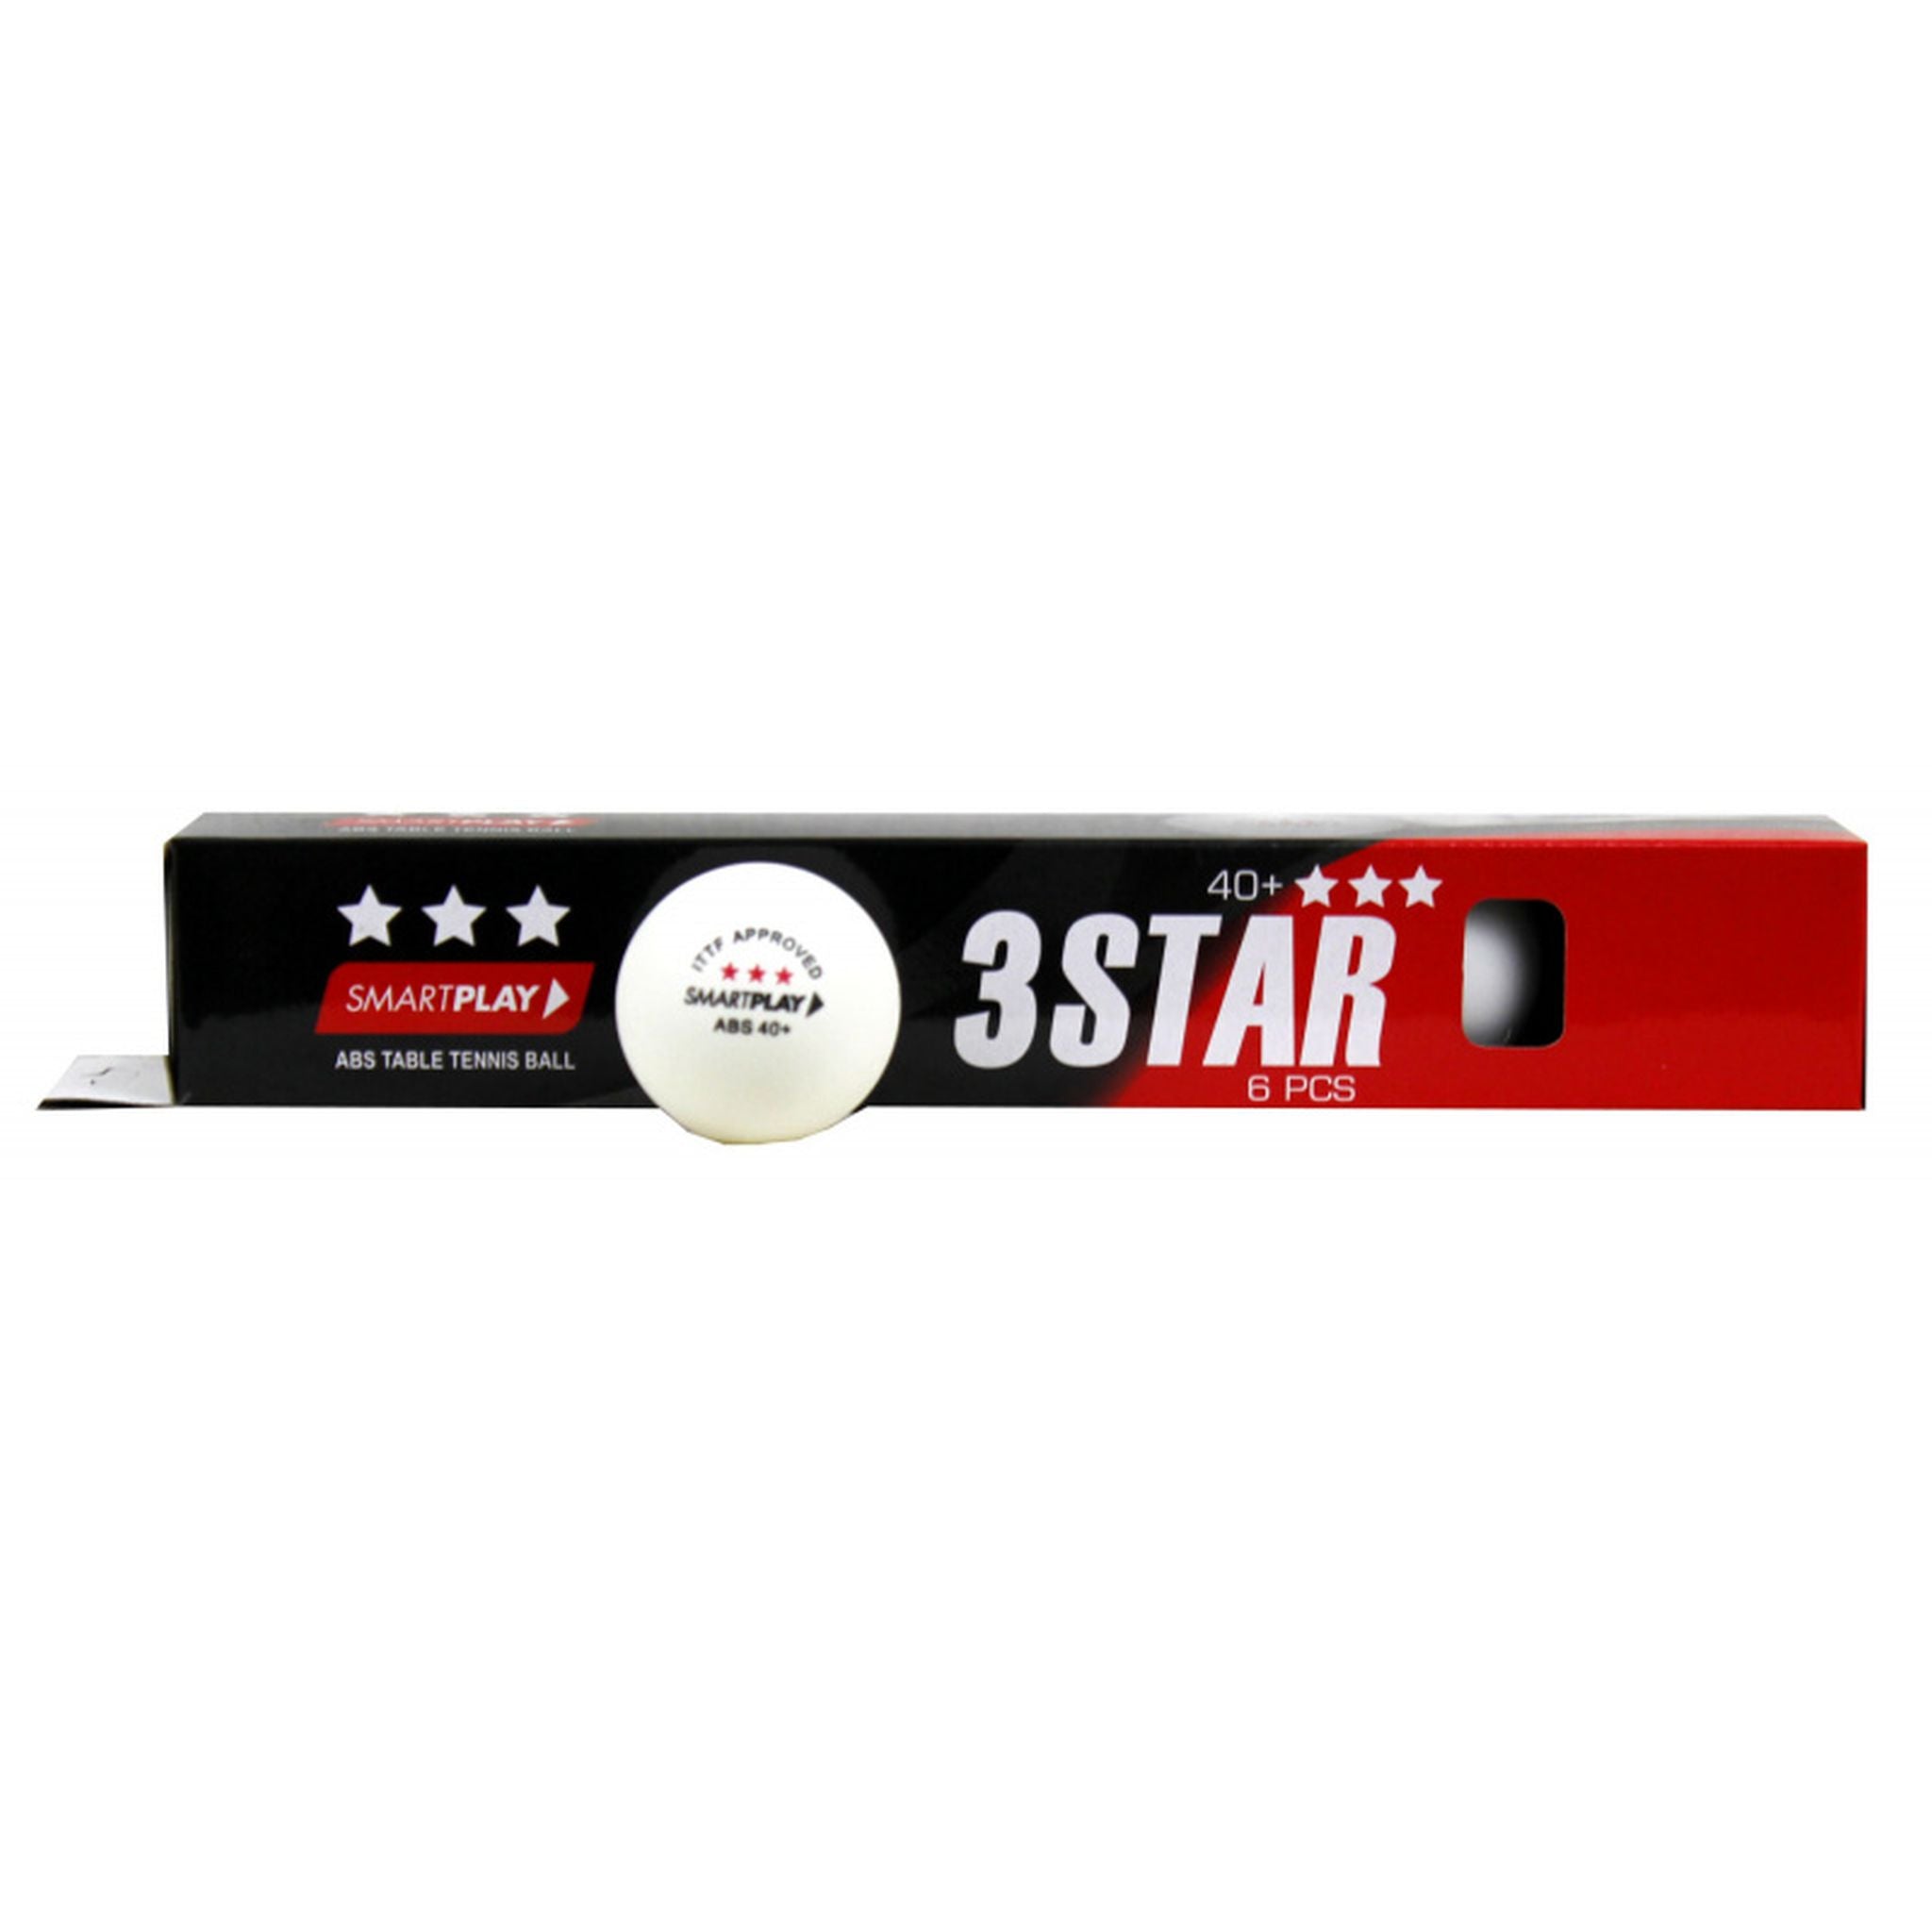 SMARTPLAY 3 Star ITTF Approved WHITE Table Tennis Balls - BOX OF 6